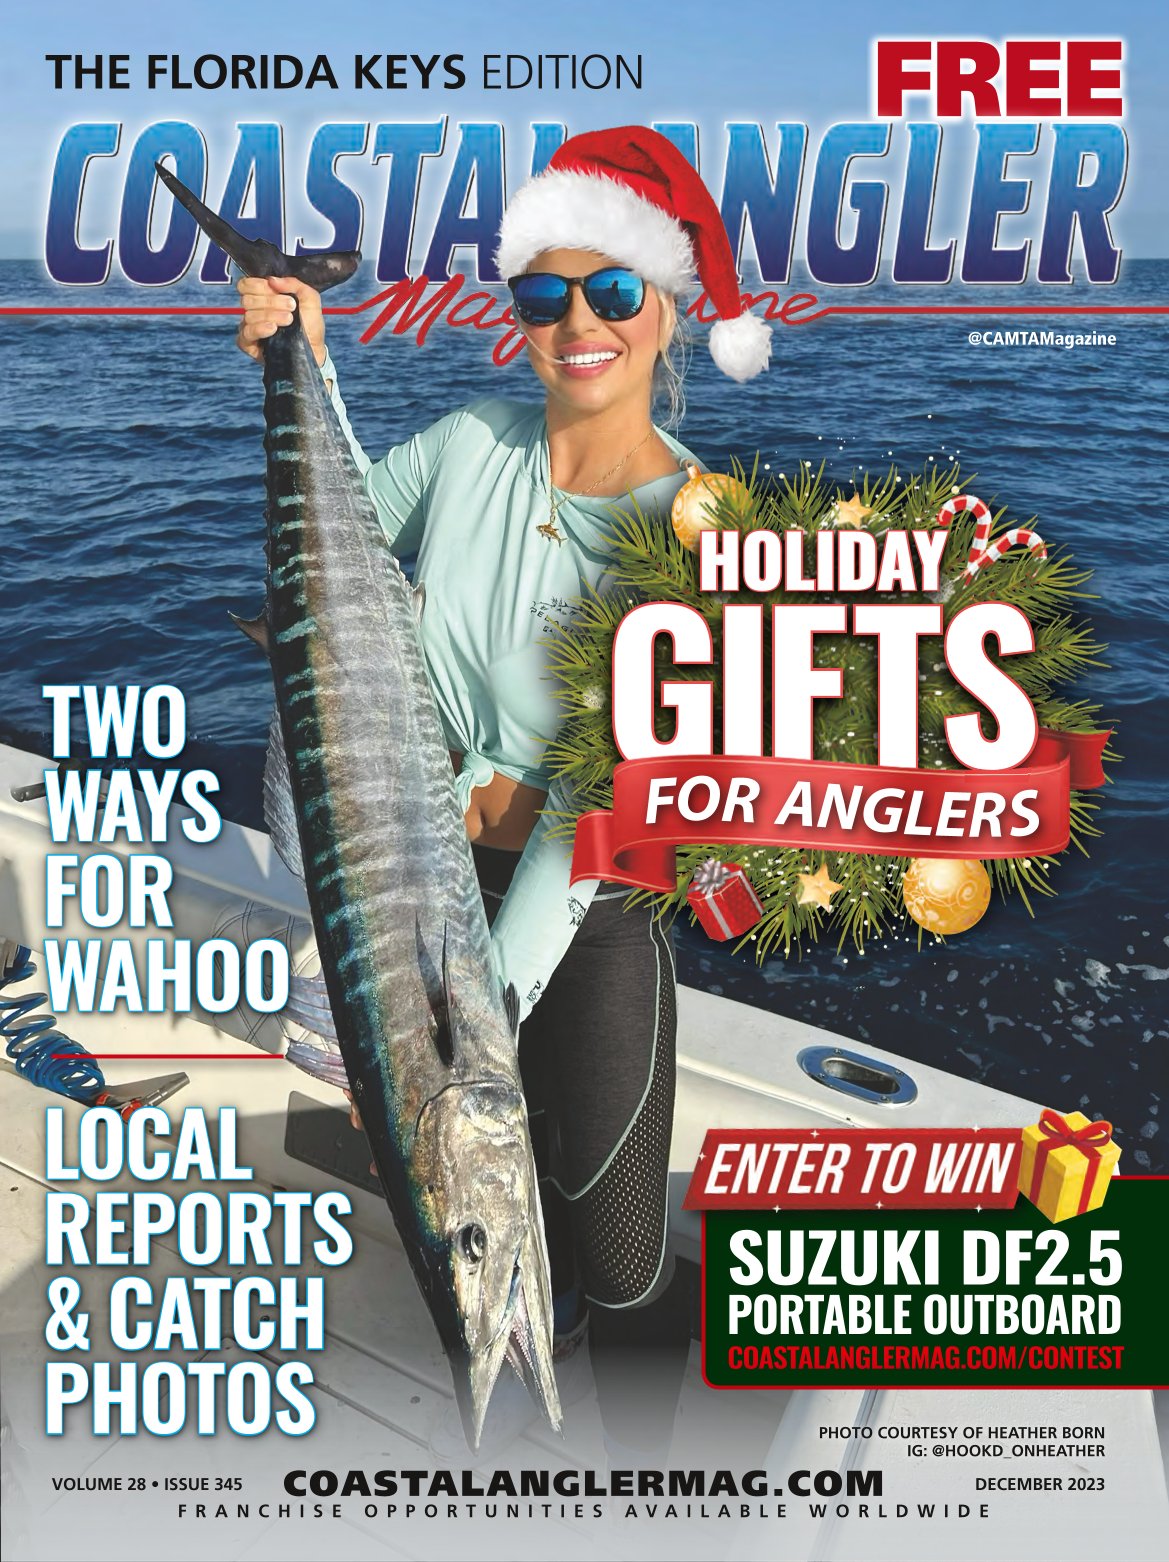 December 2023 Coastal Angler Magazine article written by Captain Quinlyn Haddon